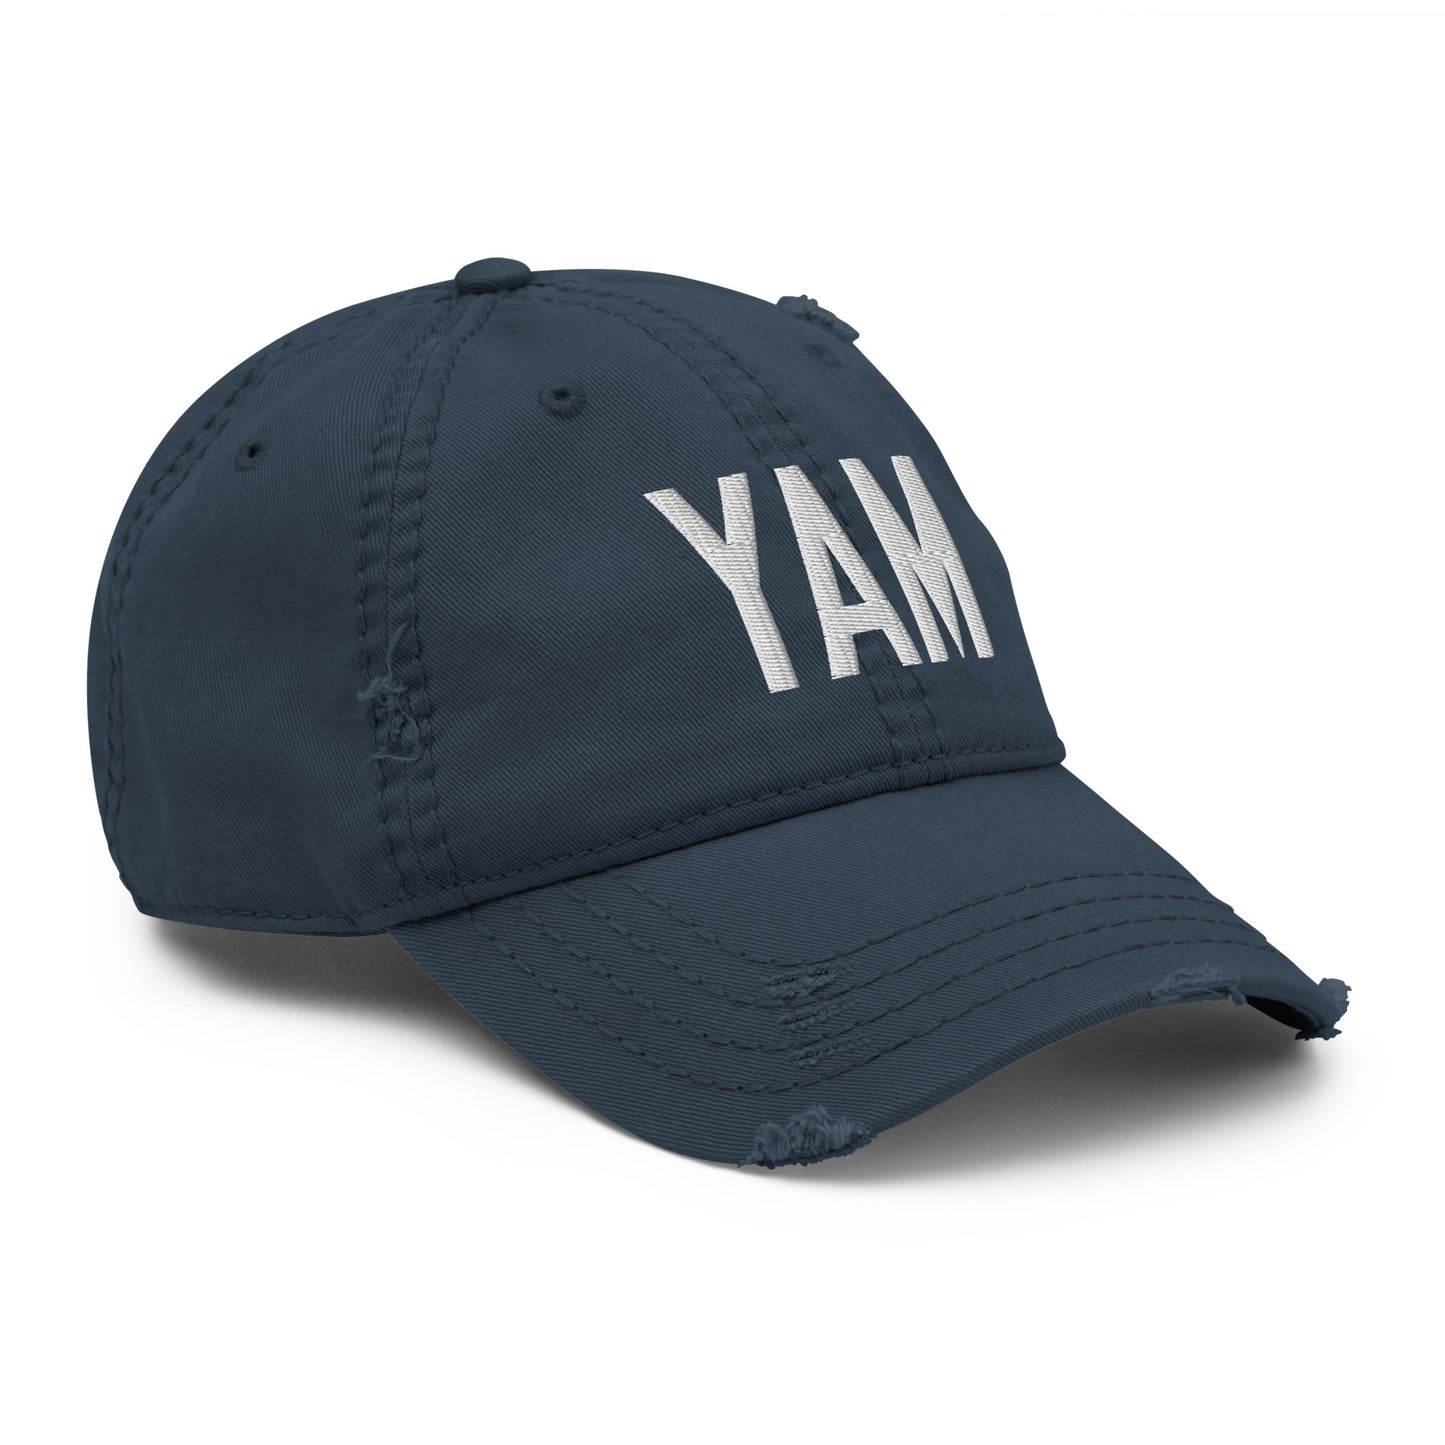 Airport Code Distressed Hat - White • YAM Sault-Ste-Marie • YHM Designs - Image 14